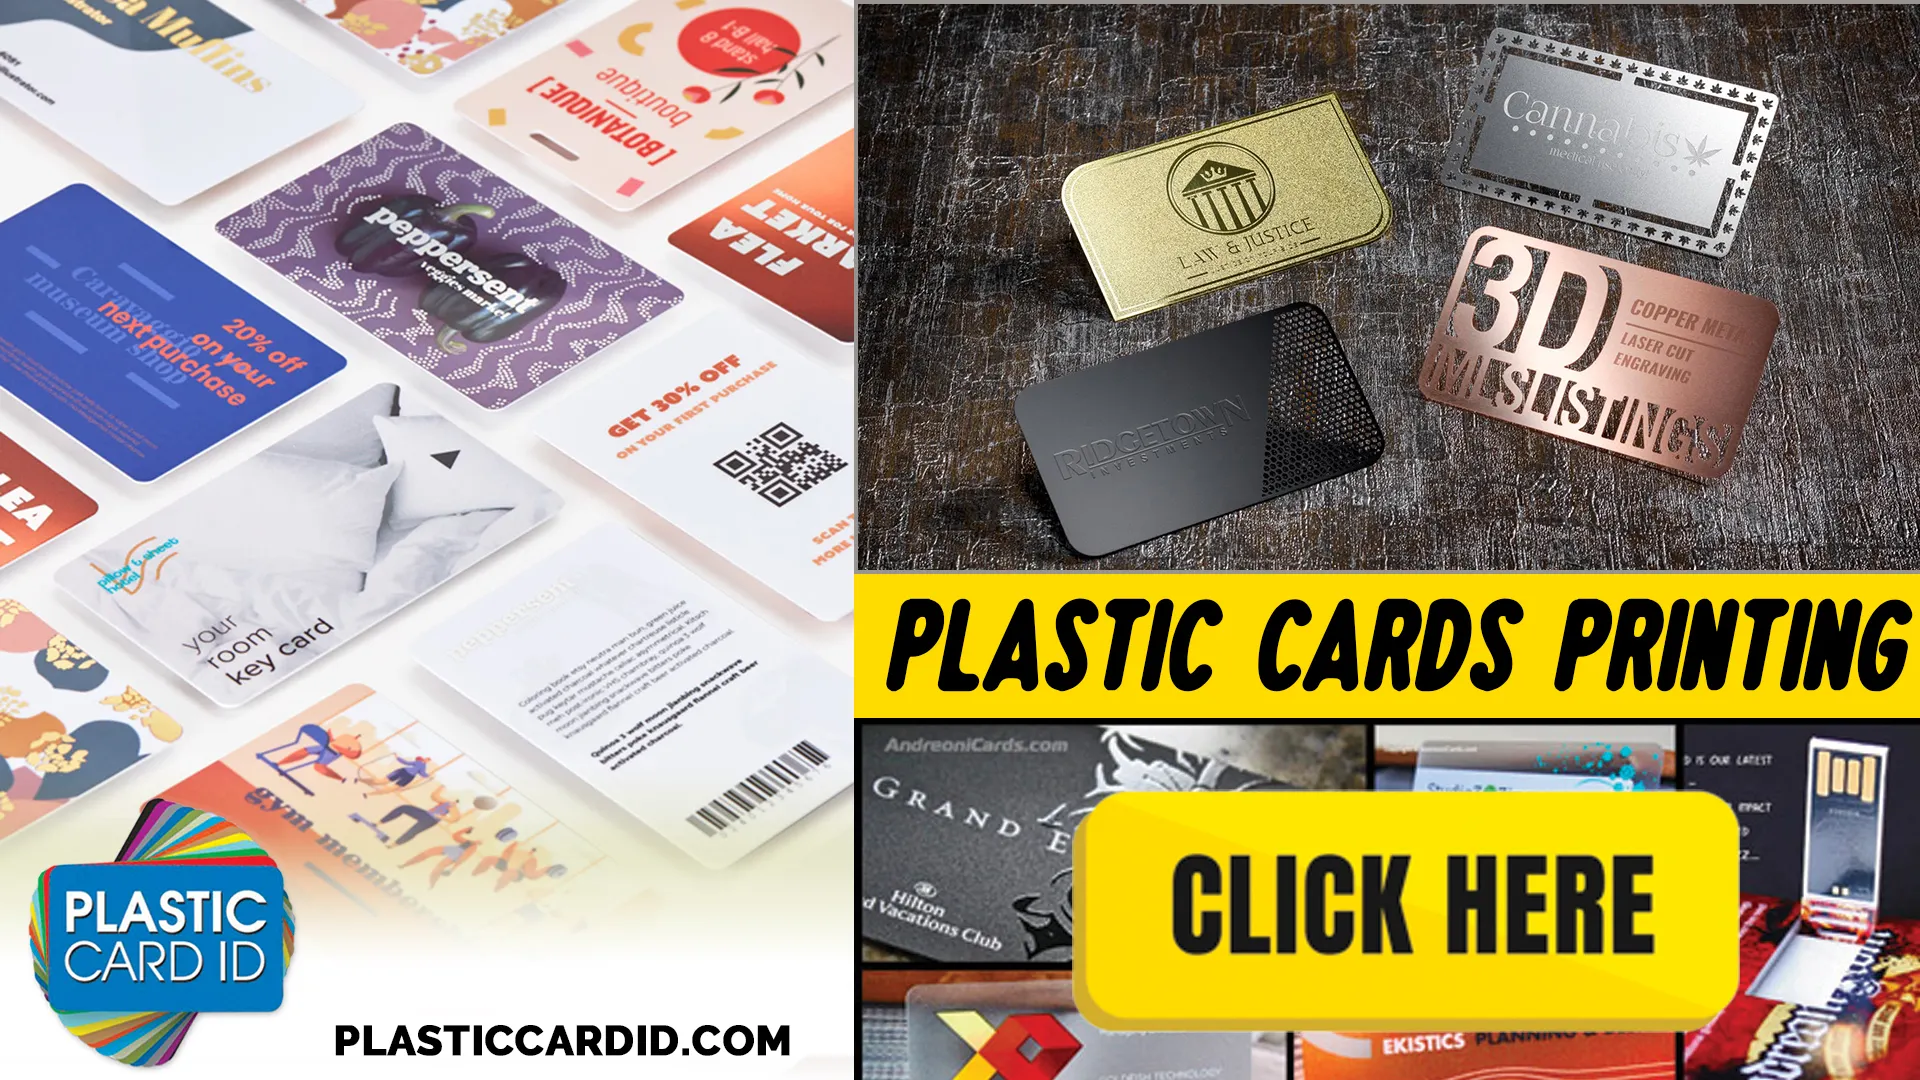 Creating a Visible Brand Presence with Plastic Card ID
